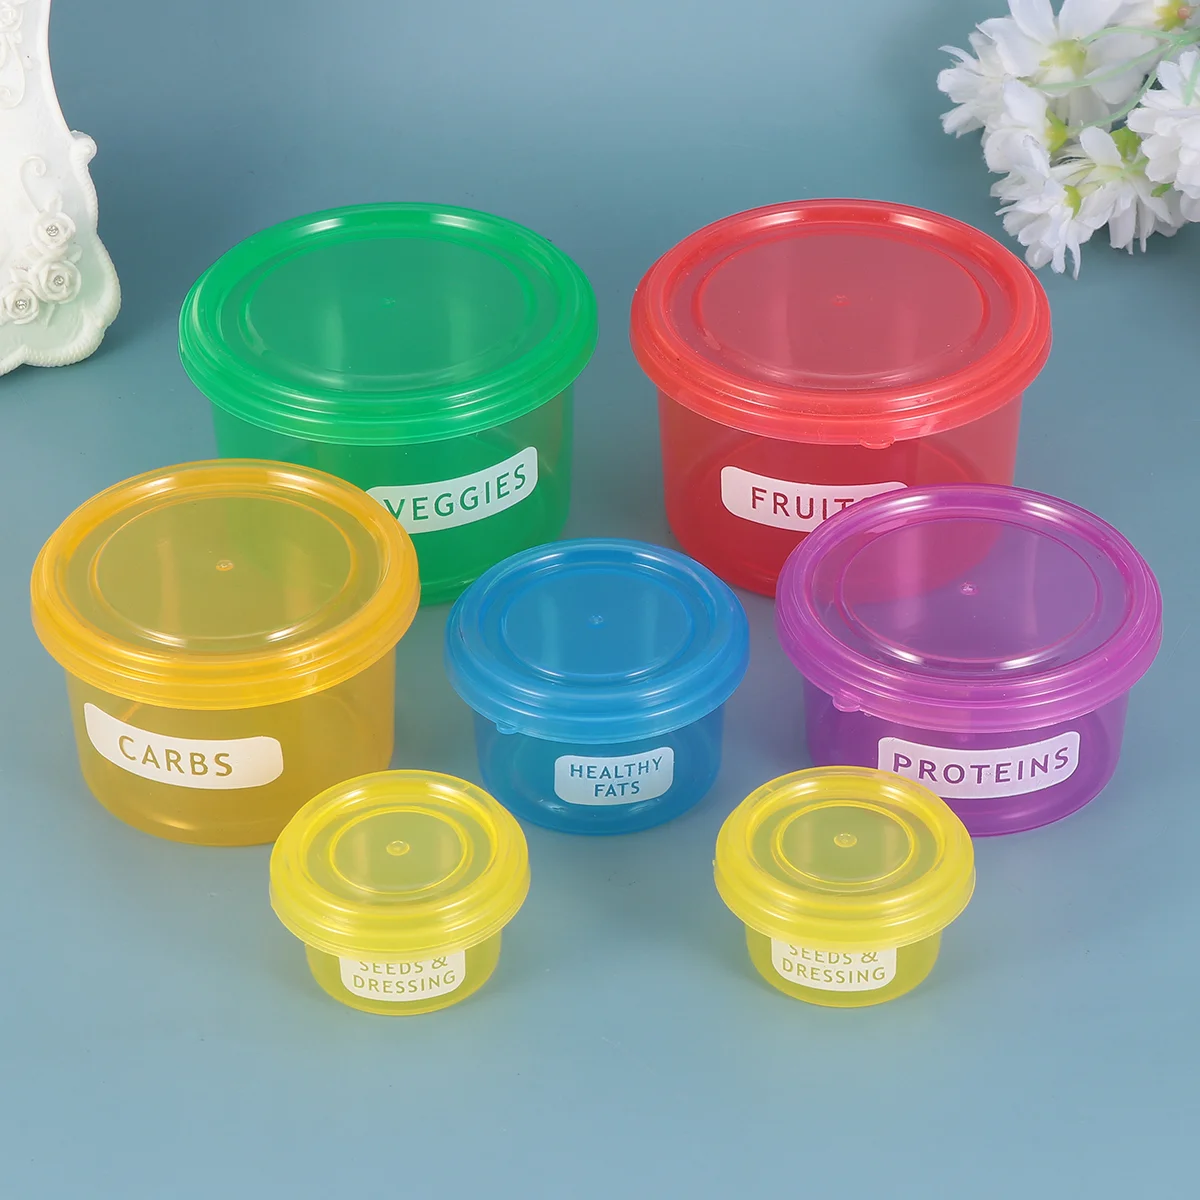 Fresh Box Round Meal Keeping Storage Diet Container Bin Case Containers Holder Portion Control Bowl Adult Keep